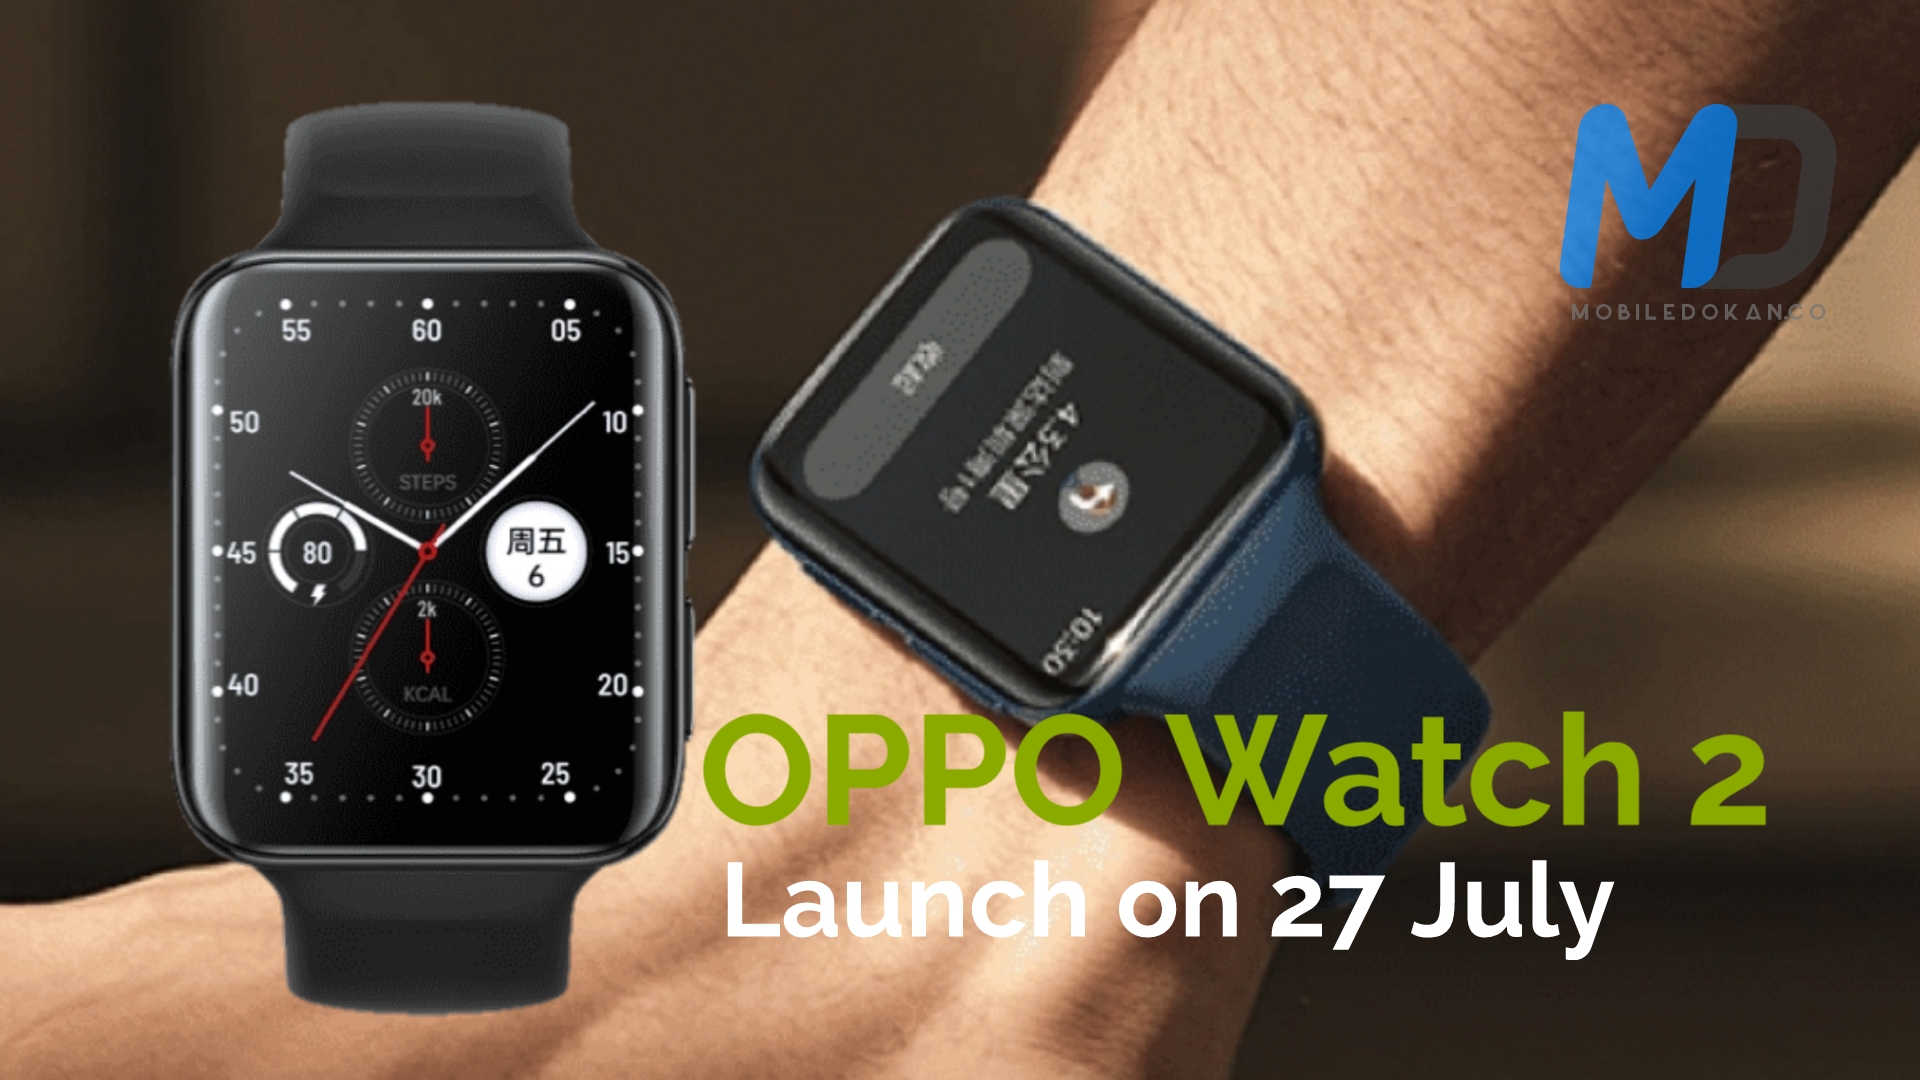 OPPO Watch 2 revealed images appear before the launch on 27 July